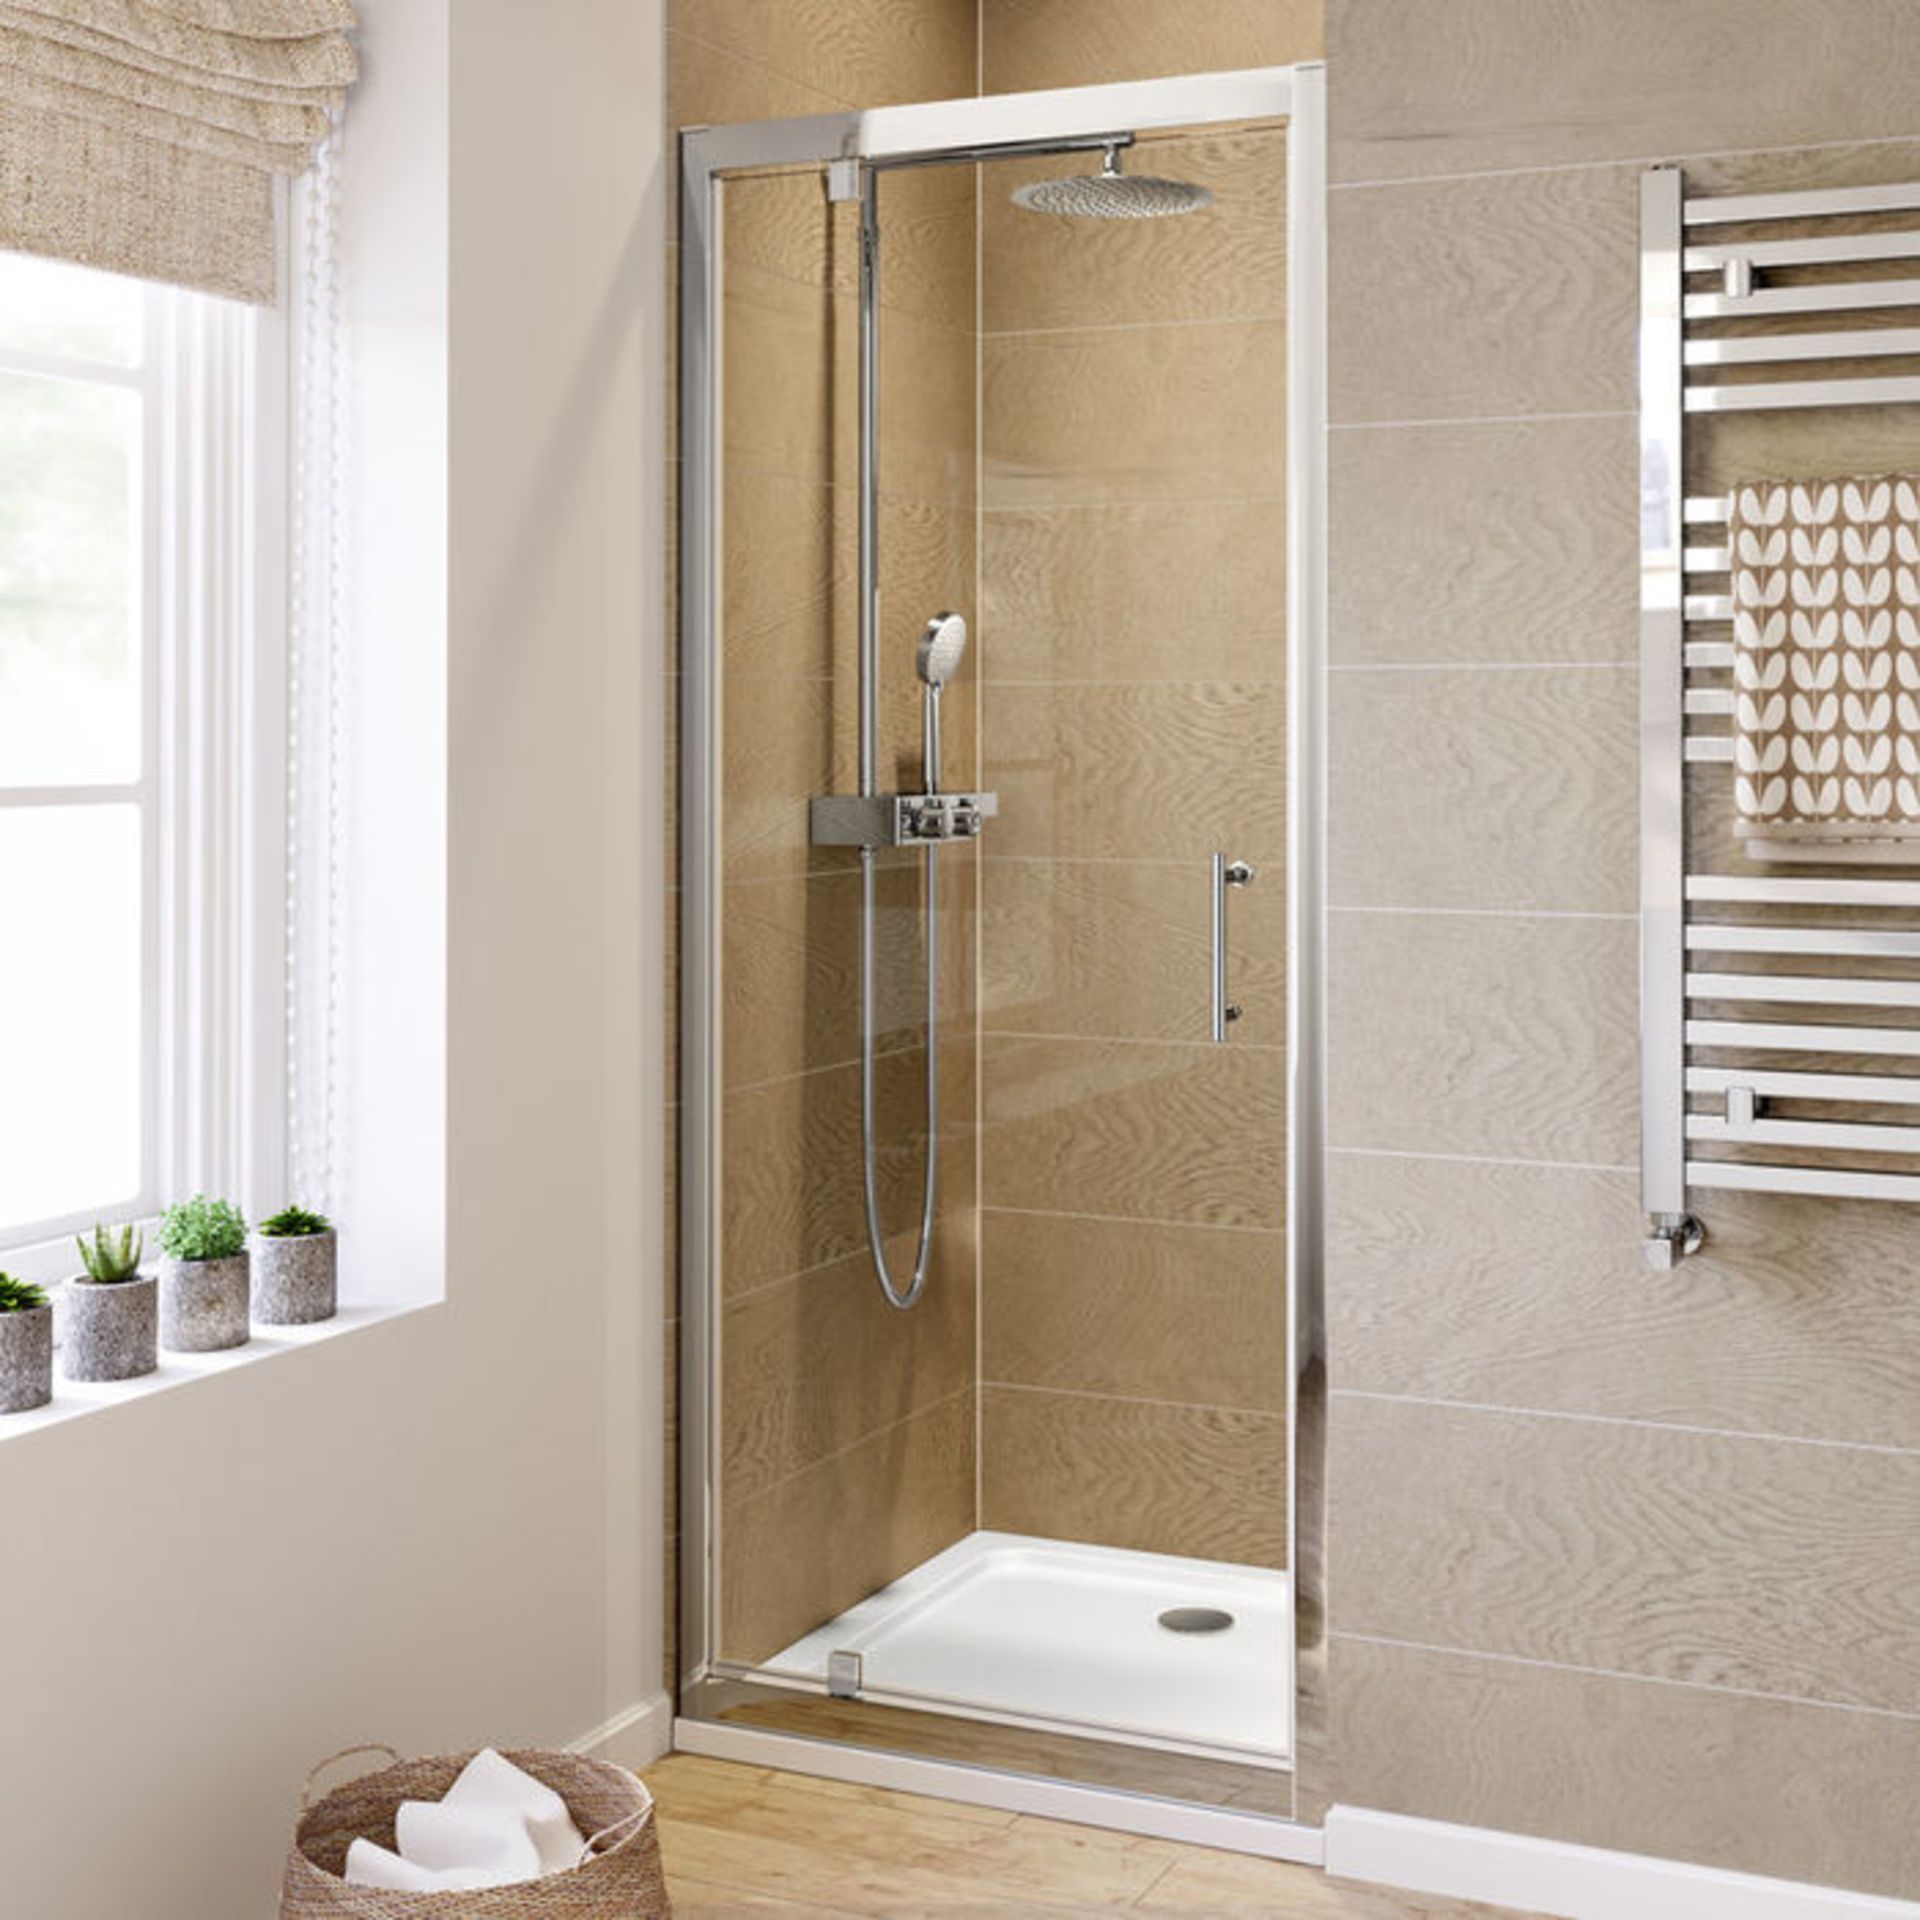 New 6 mm - Elements Pivot 760 mm Shower Door 6 mm Safety Glass Fully Waterproof Tested. - Image 2 of 2